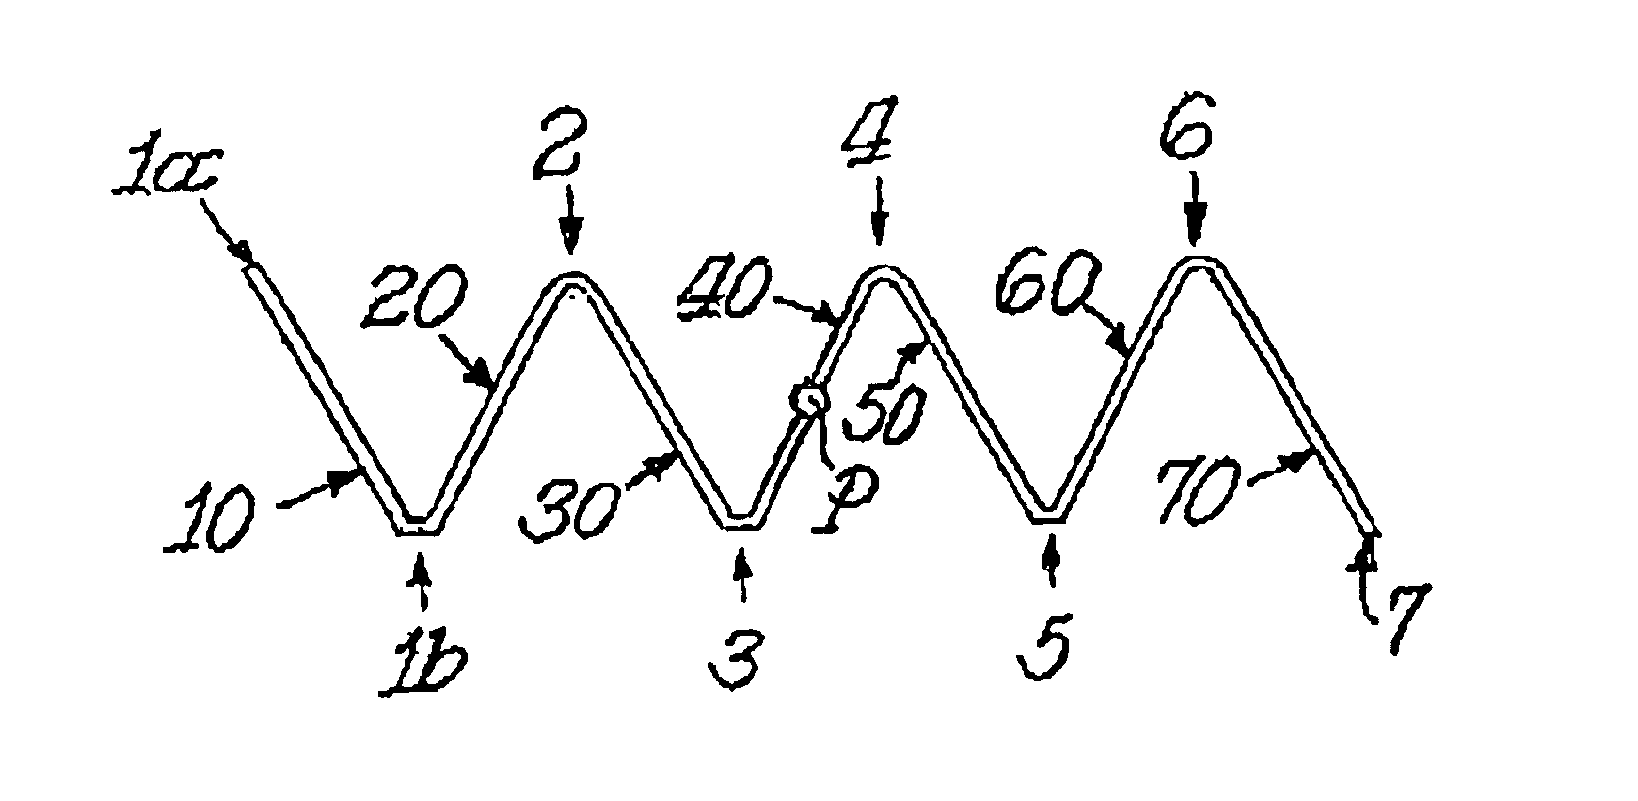 Fabric incorporating polymer filaments having profiled cross-section